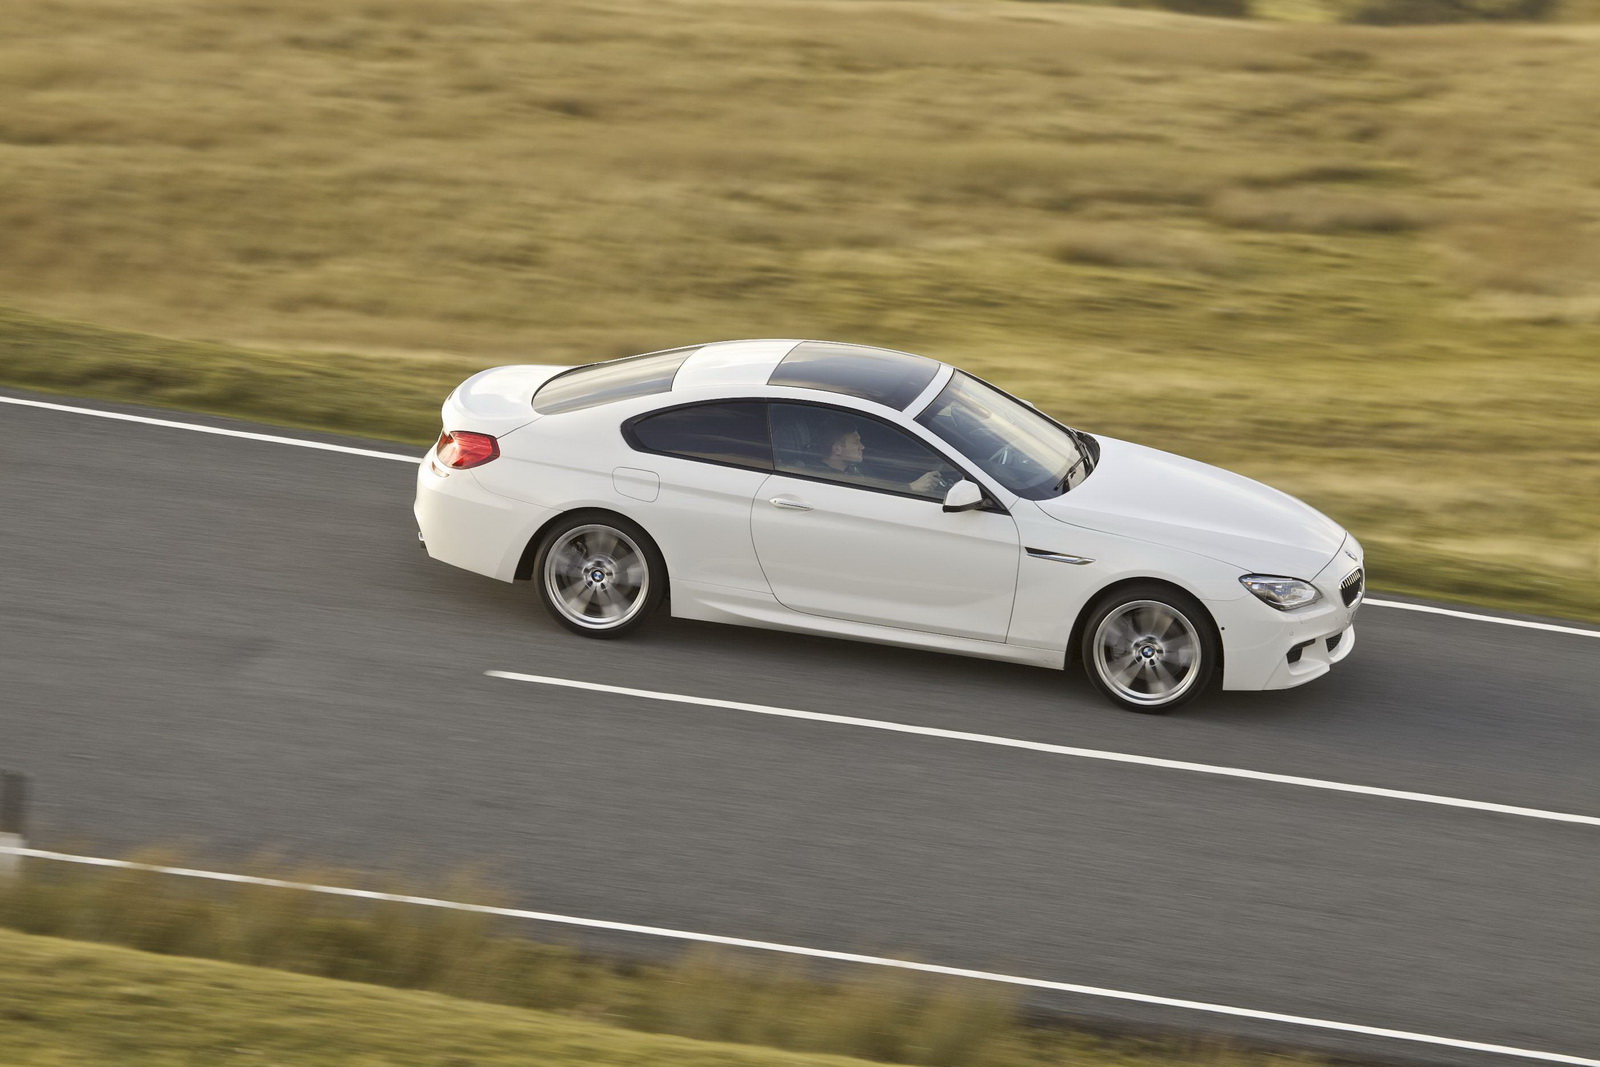 BMW 6 Series Coupe priced under £60K in the UK